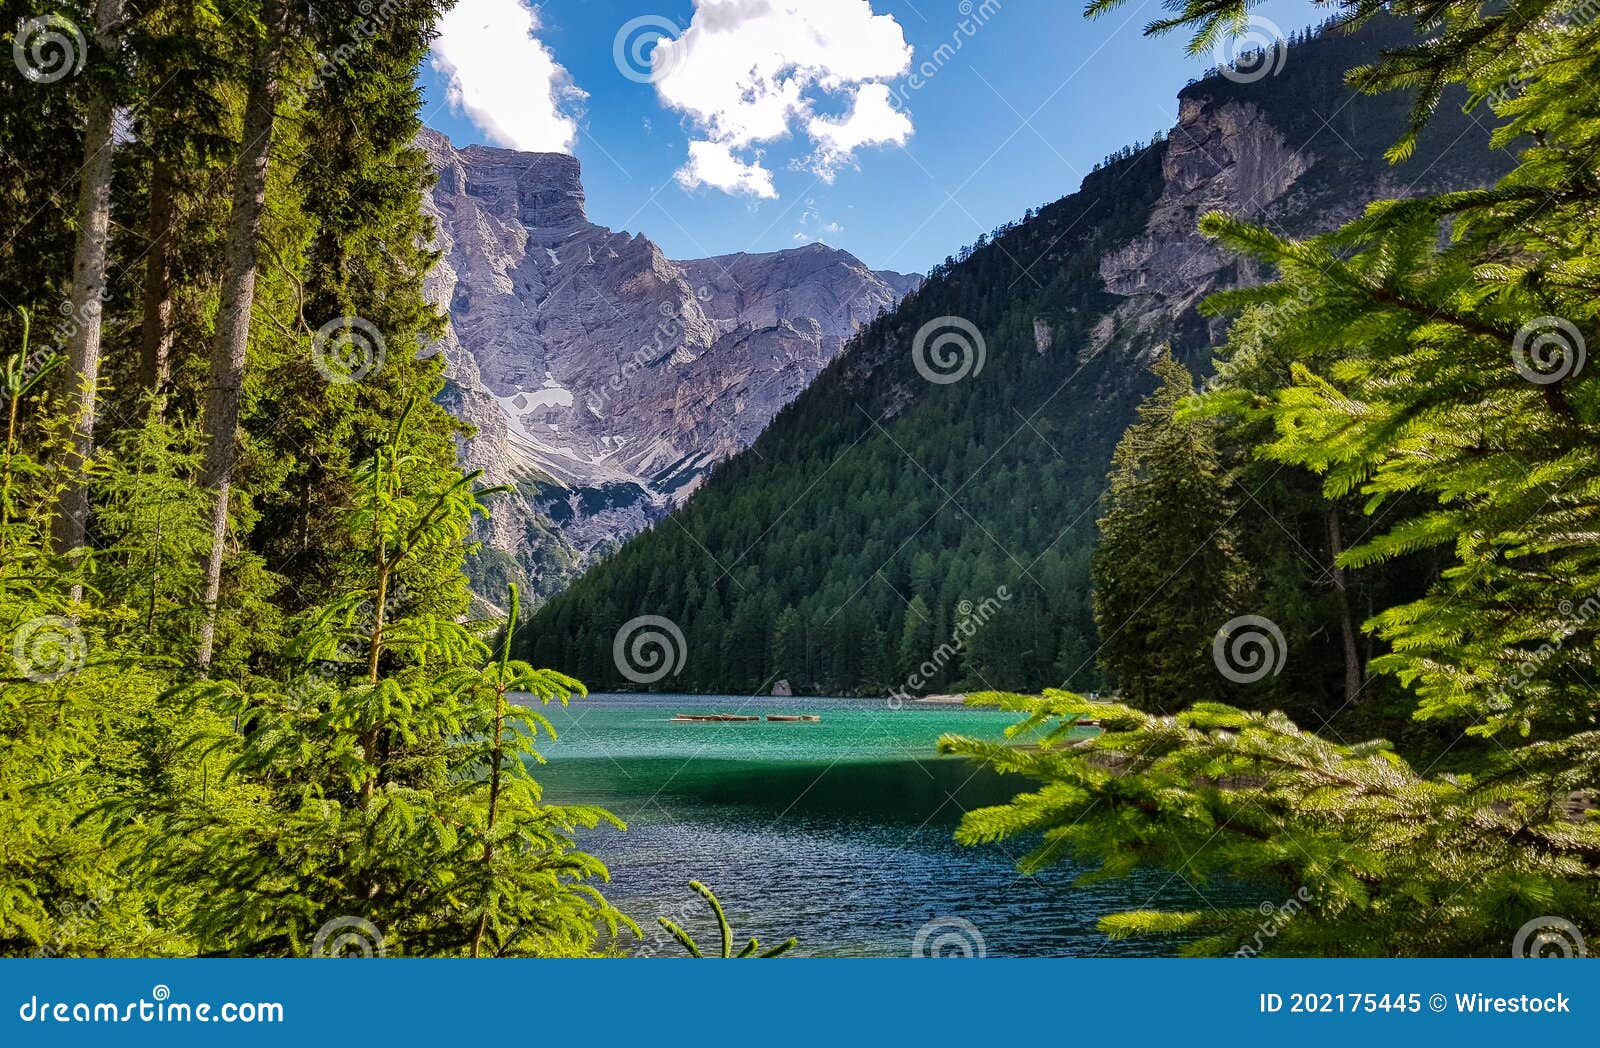 view of the park of fanes-sennes-braies in mareo italy